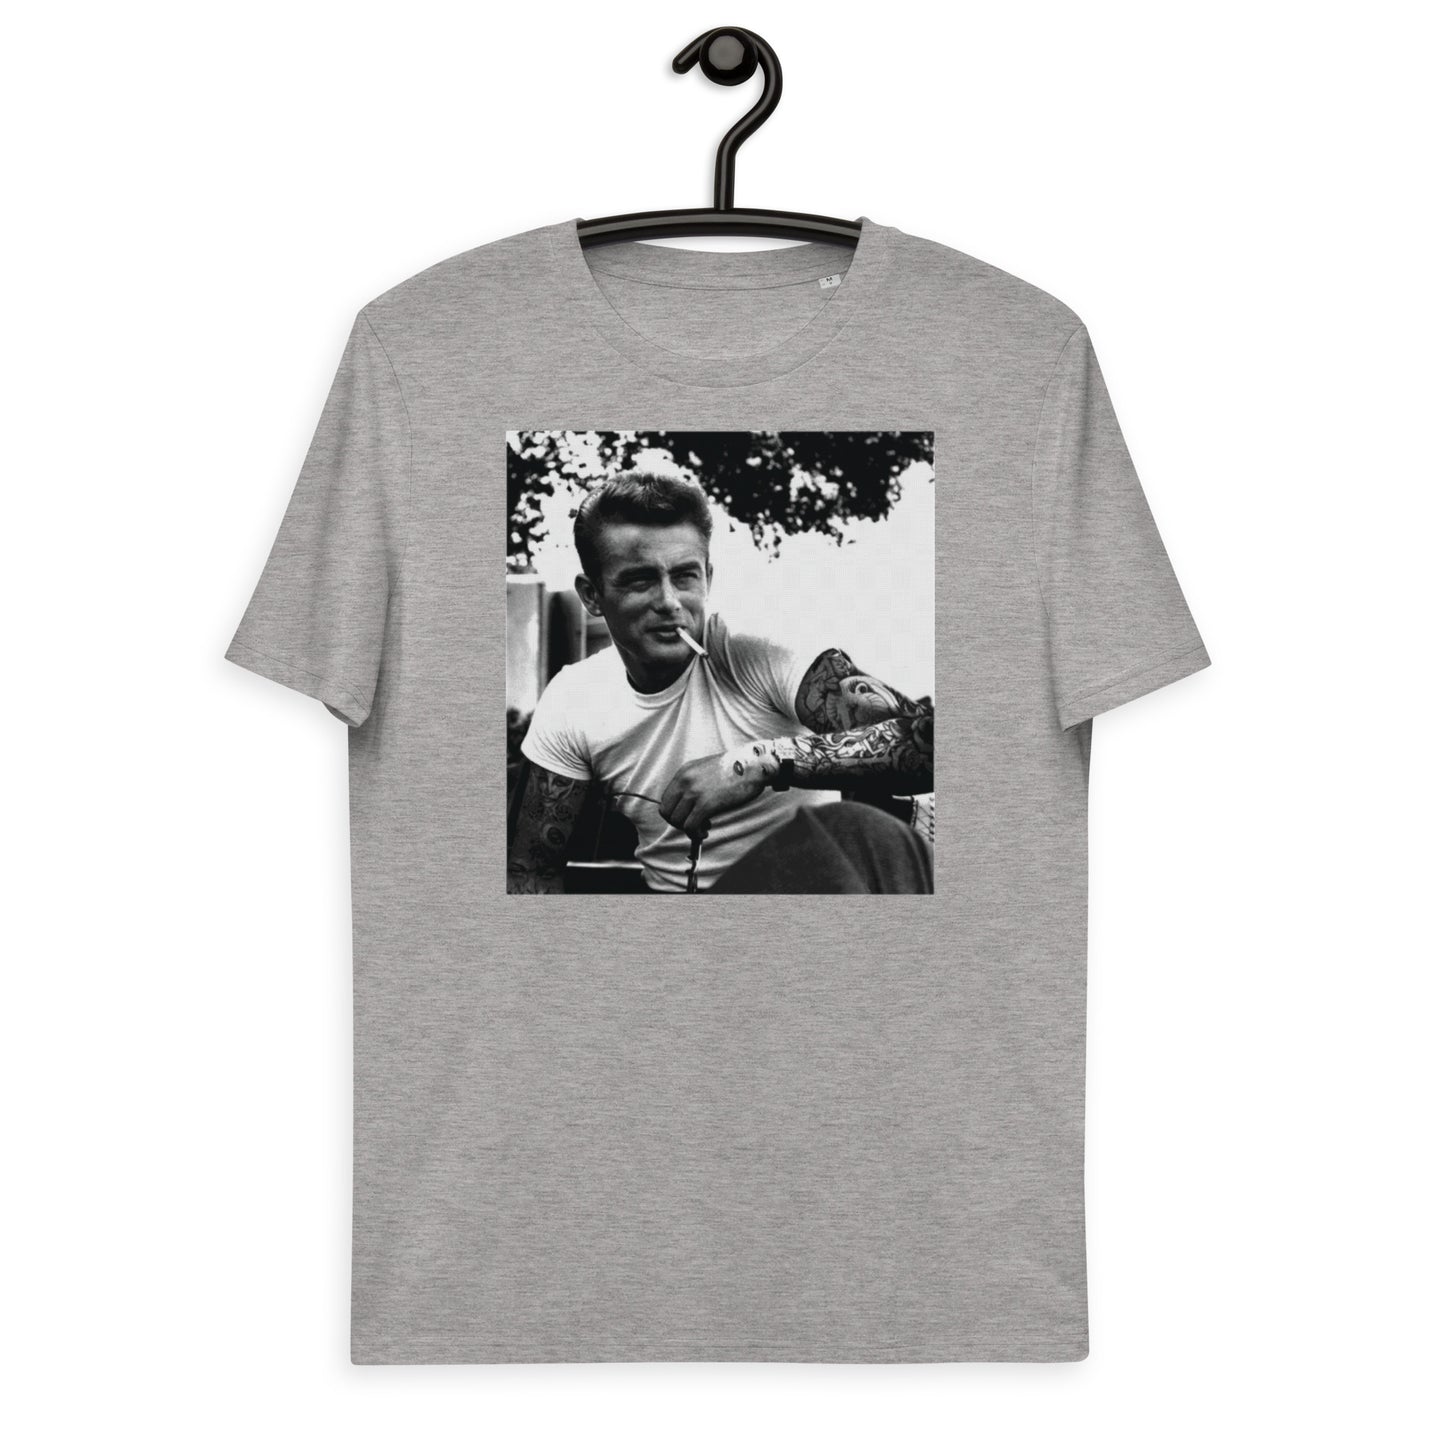 James Dean KiSS Unisex organic cotton t-shirt - Tattooed Rebel without a Cause 50s